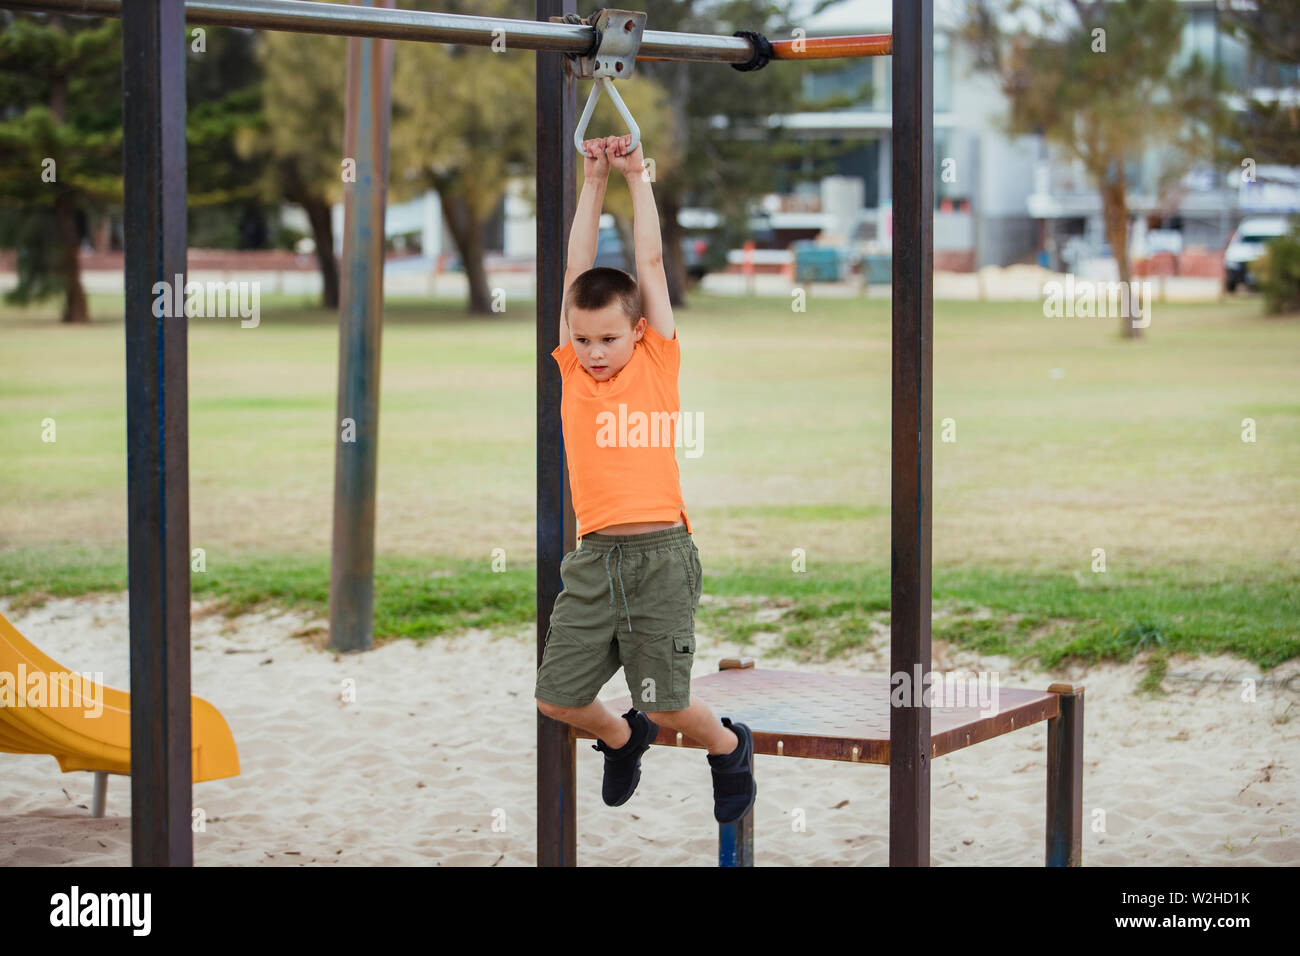 A side-view shot of a young caucasian boy wearing casual clothing, he is swinging from a metal frame in a public park. Stock Photo